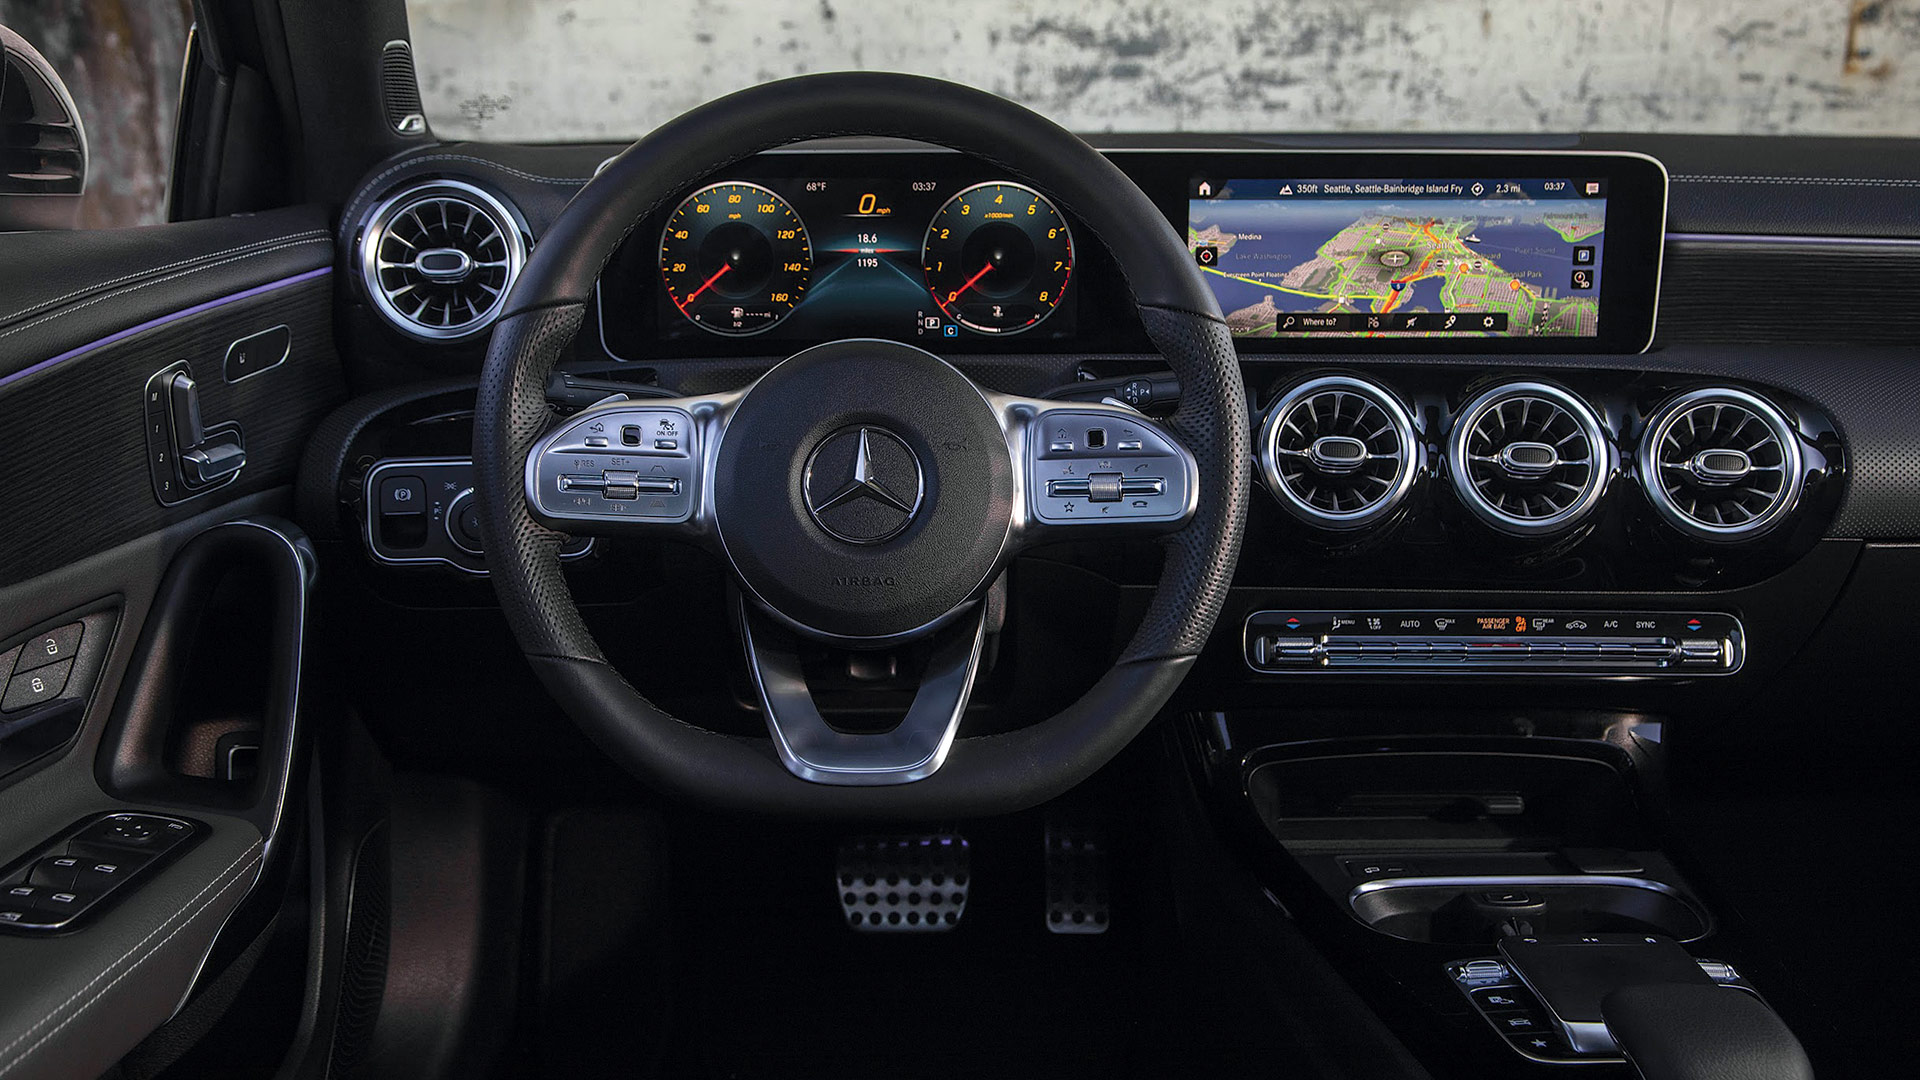 The A-Class is equipped with MBUX, hailed as the next generation of user-friendly technology.